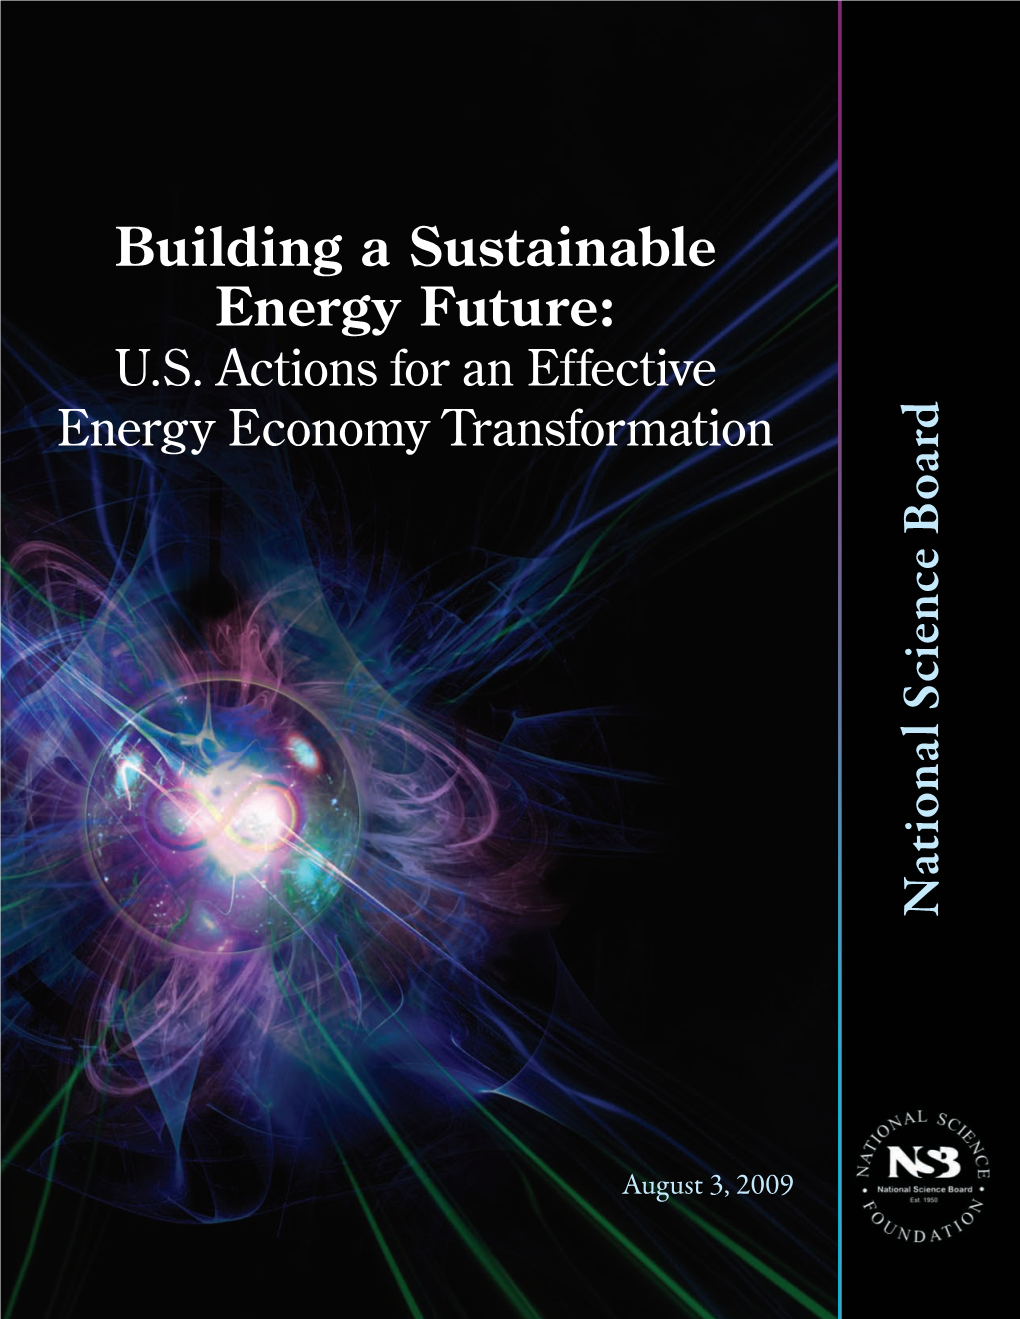 NSB-09-55, Building a Sustainable Energy Future: U.S. Action for An